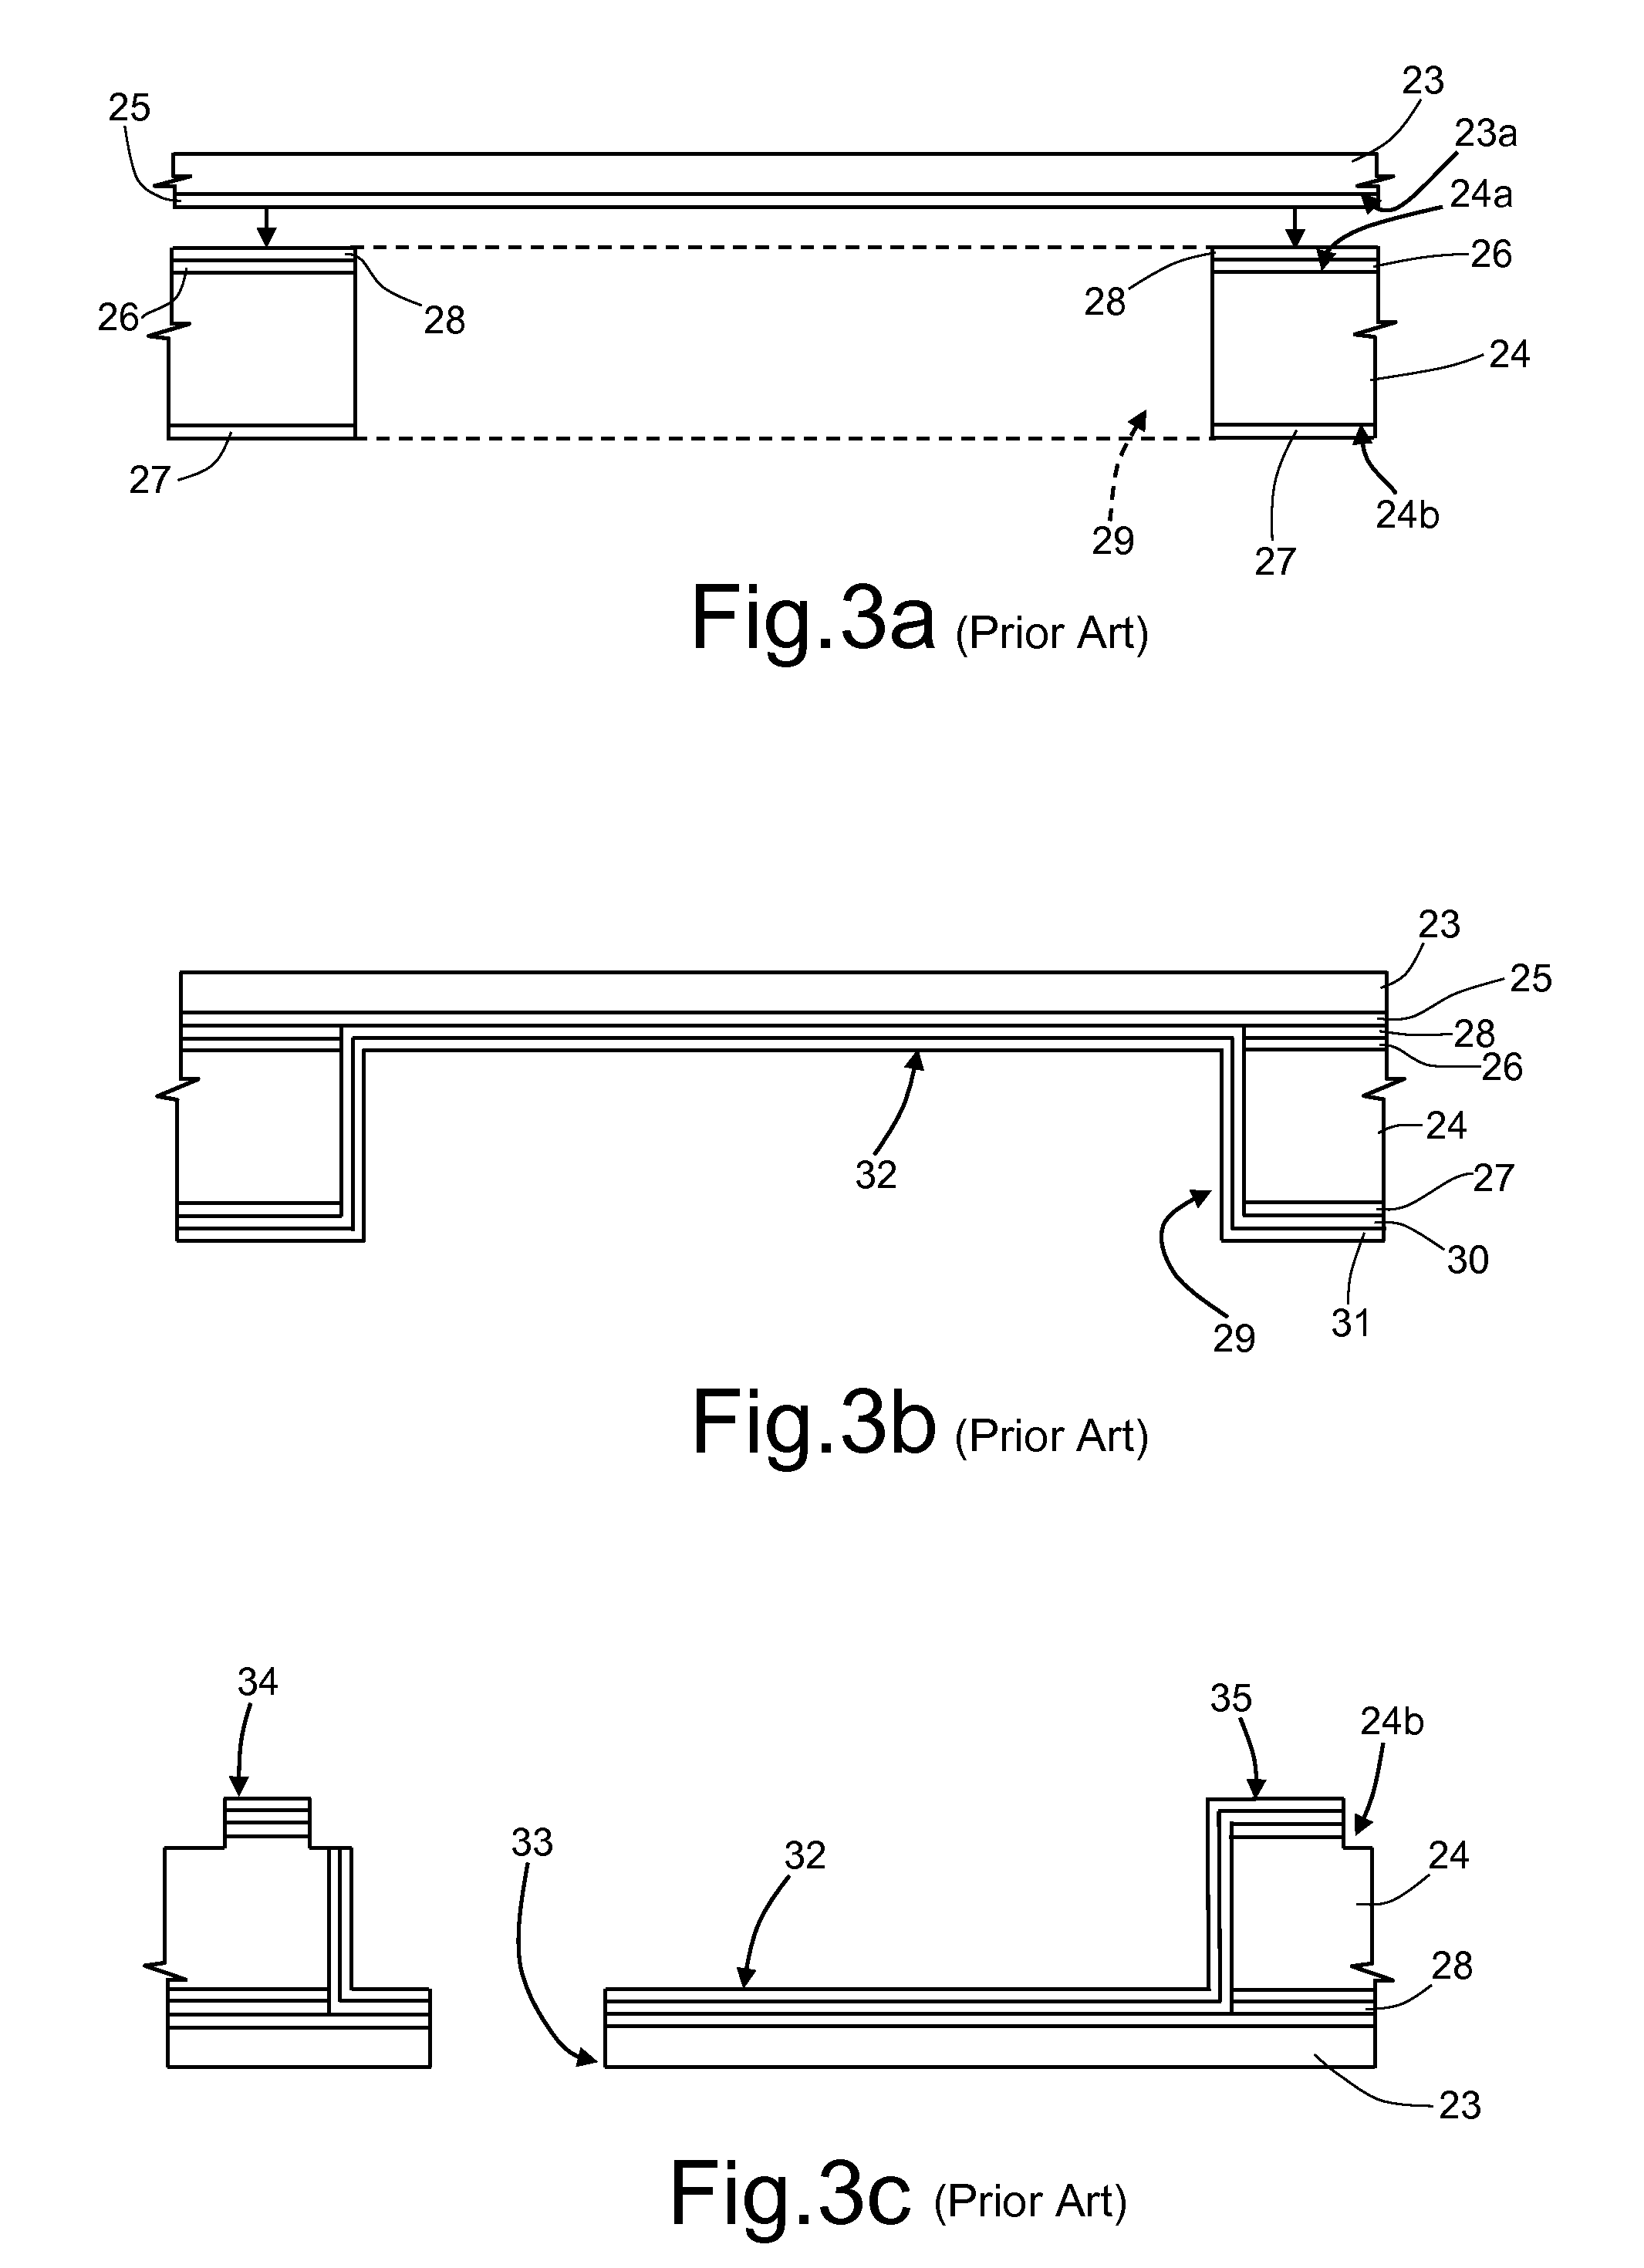 Semiconductor integrated device assembly and related manufacturing process